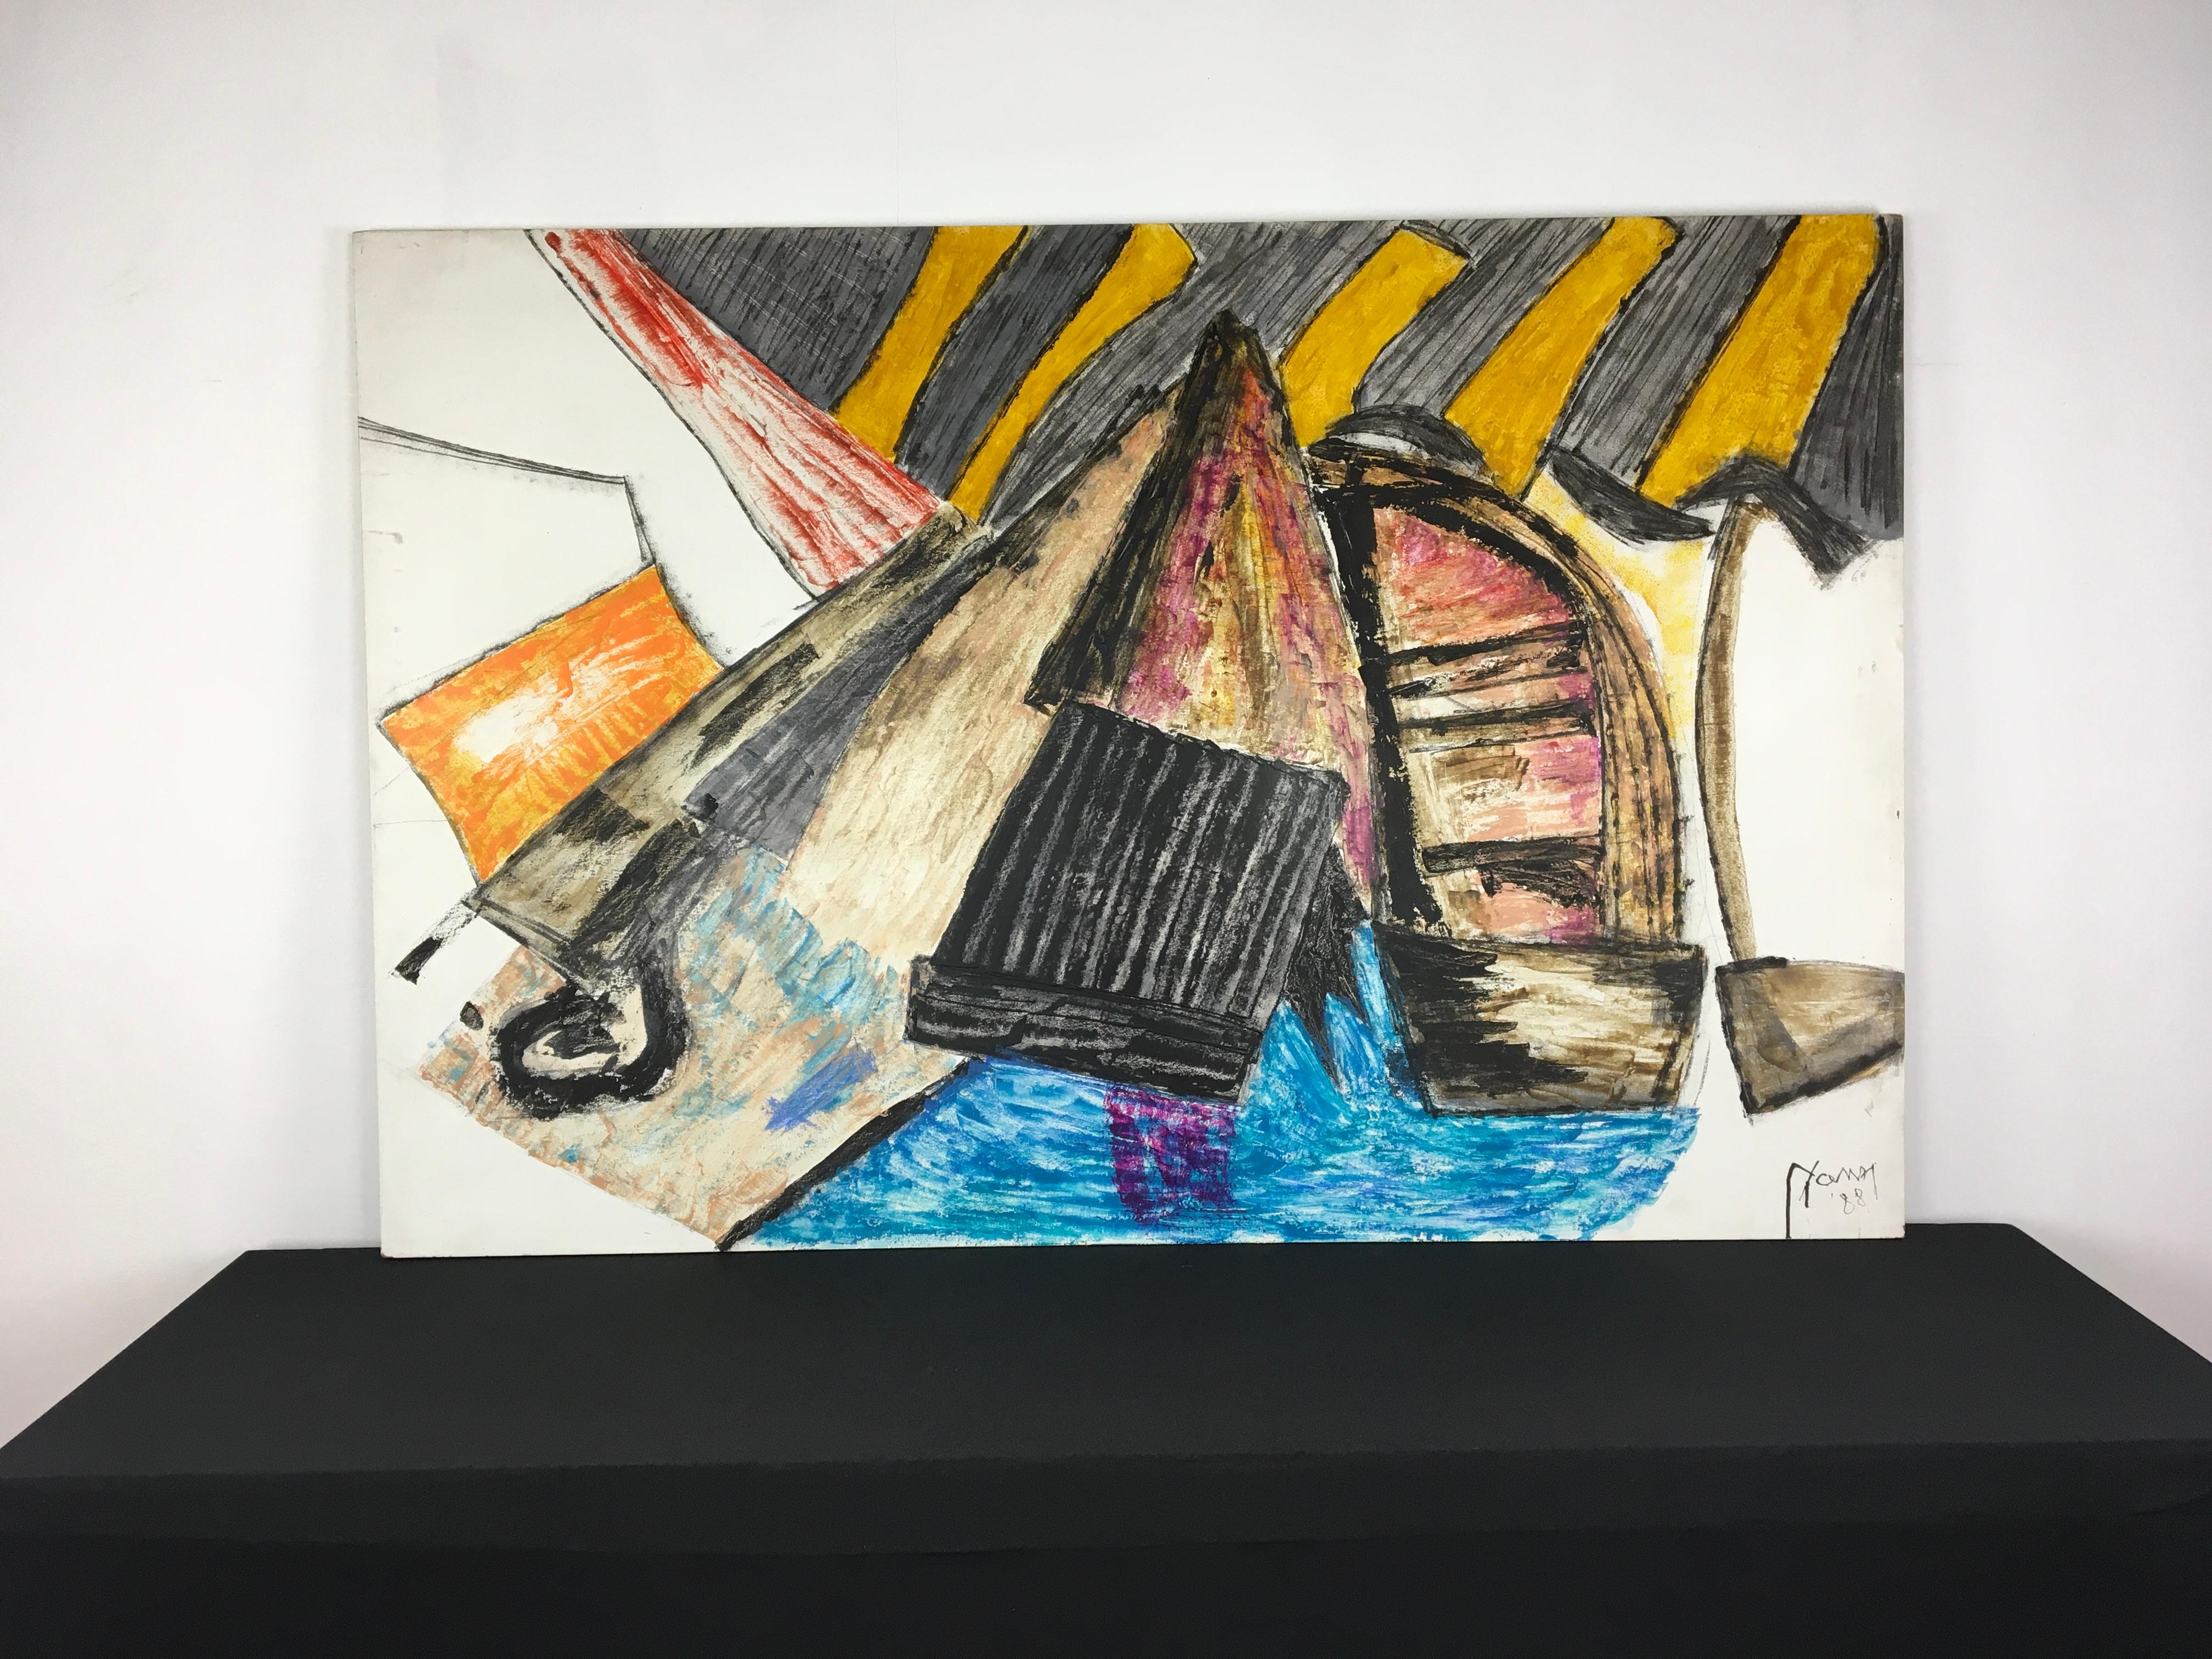 Modern Abstract Painted Artwork with Boats , Yann, 1988, Antwerp For Sale